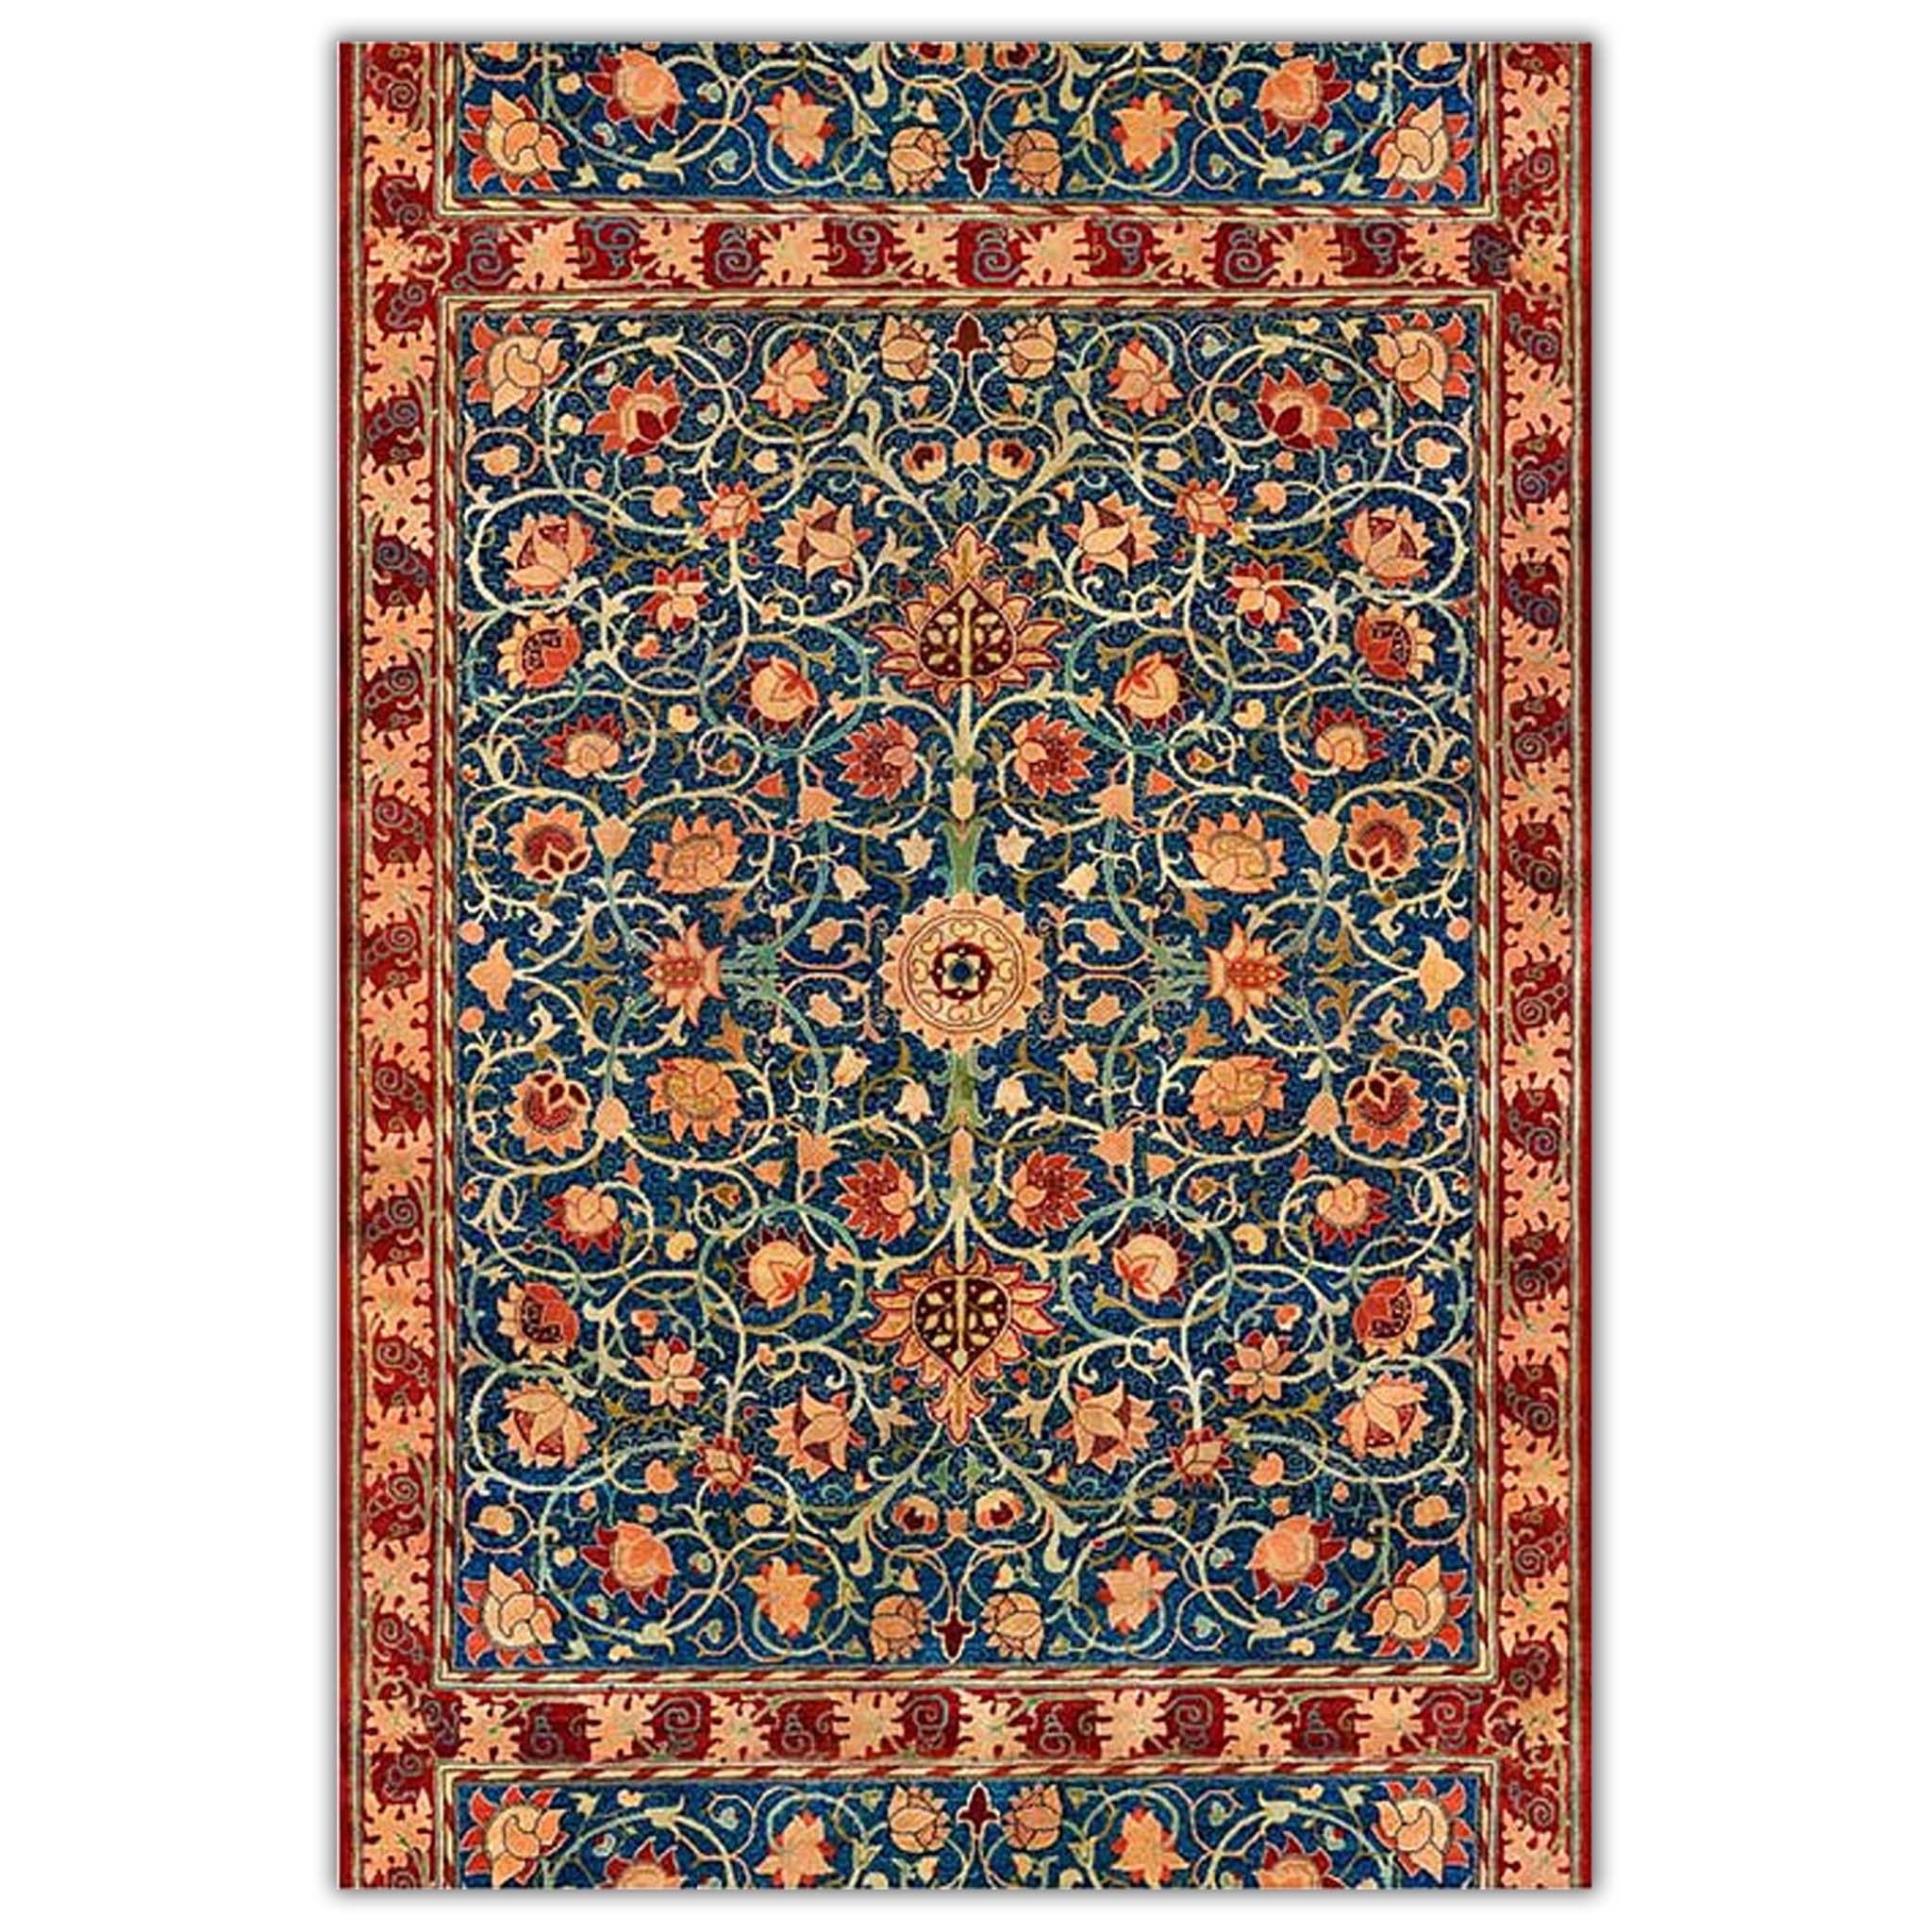 A0 rice paper design of a vintage carpet of reds and blues and features a repeating floral pattern. White borders on the sides.